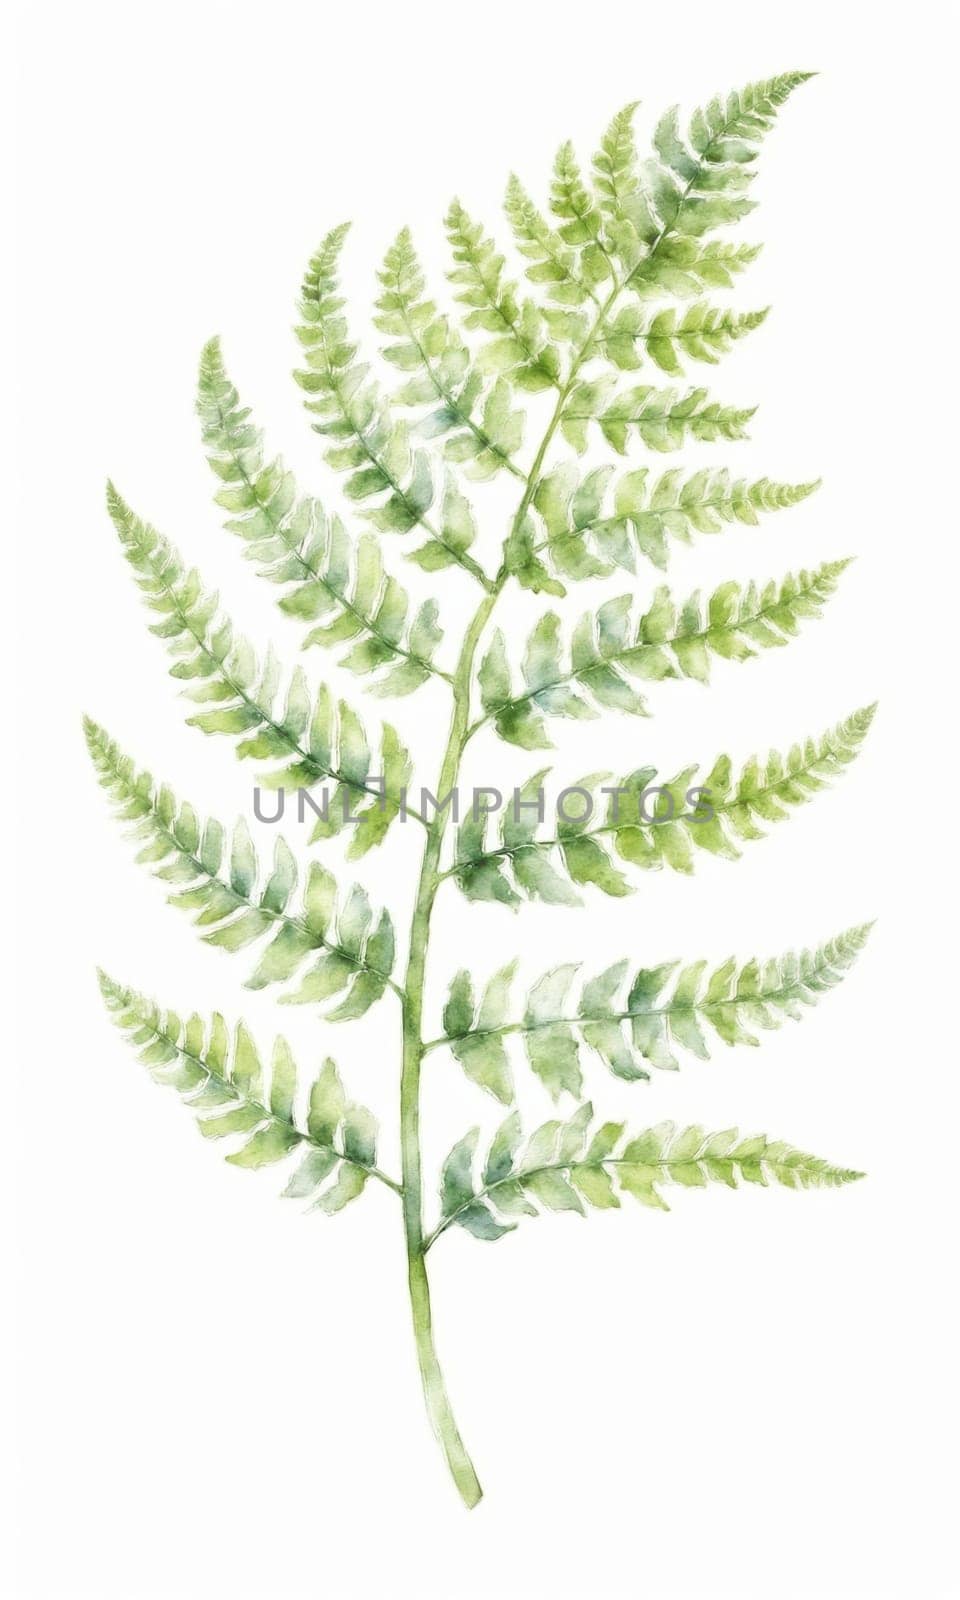 watercolor drawing of fern leaf on white background by Andre1ns